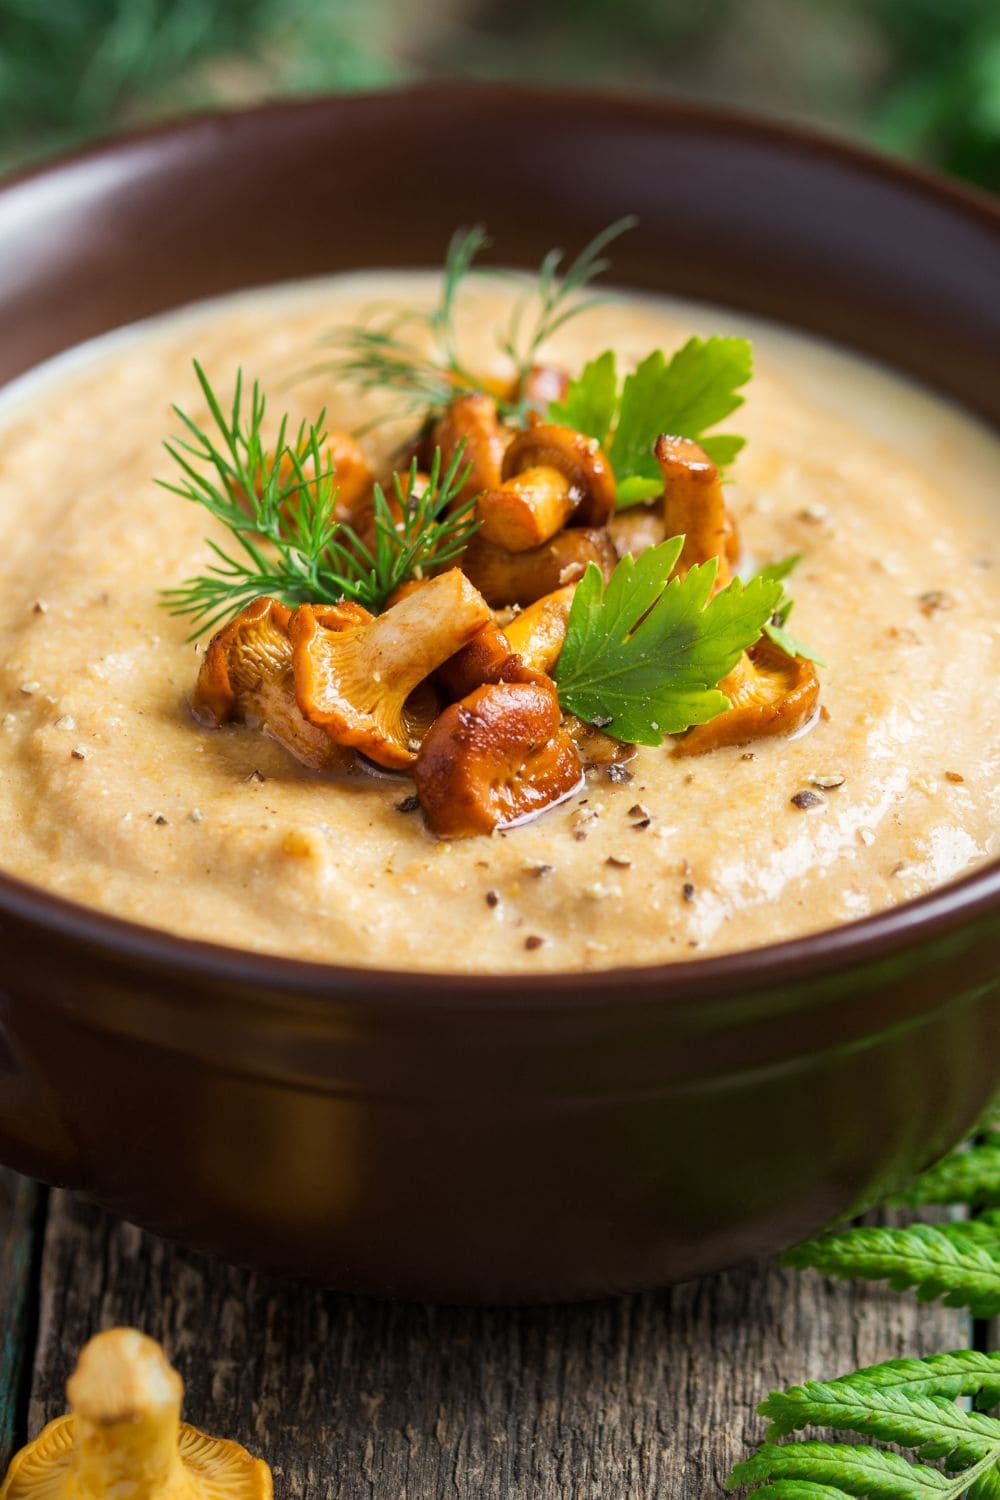 25 Recipes With Cream of Mushroom Soup We Can’t Resist